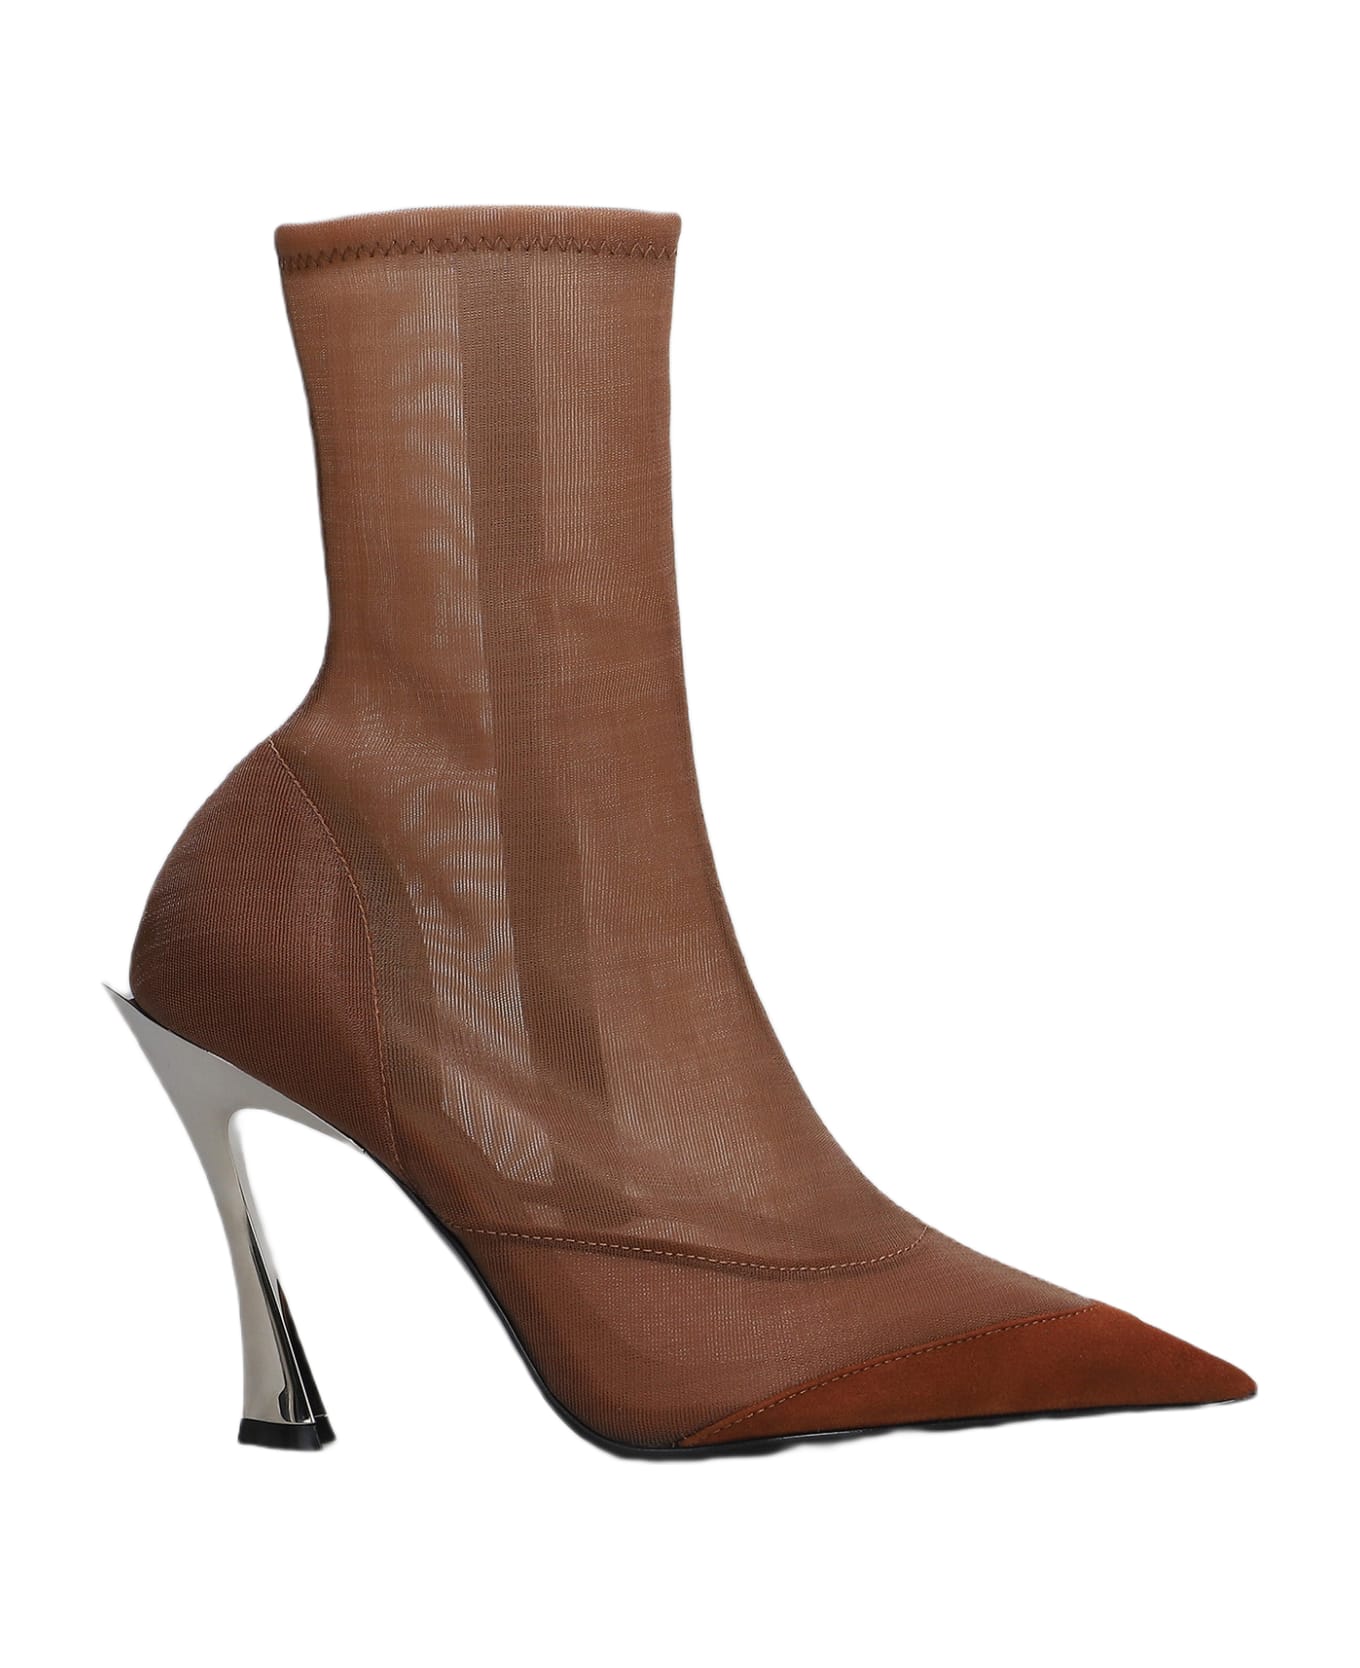 Mugler High Heels Ankle Boots In Leather Color Nylon - leather color